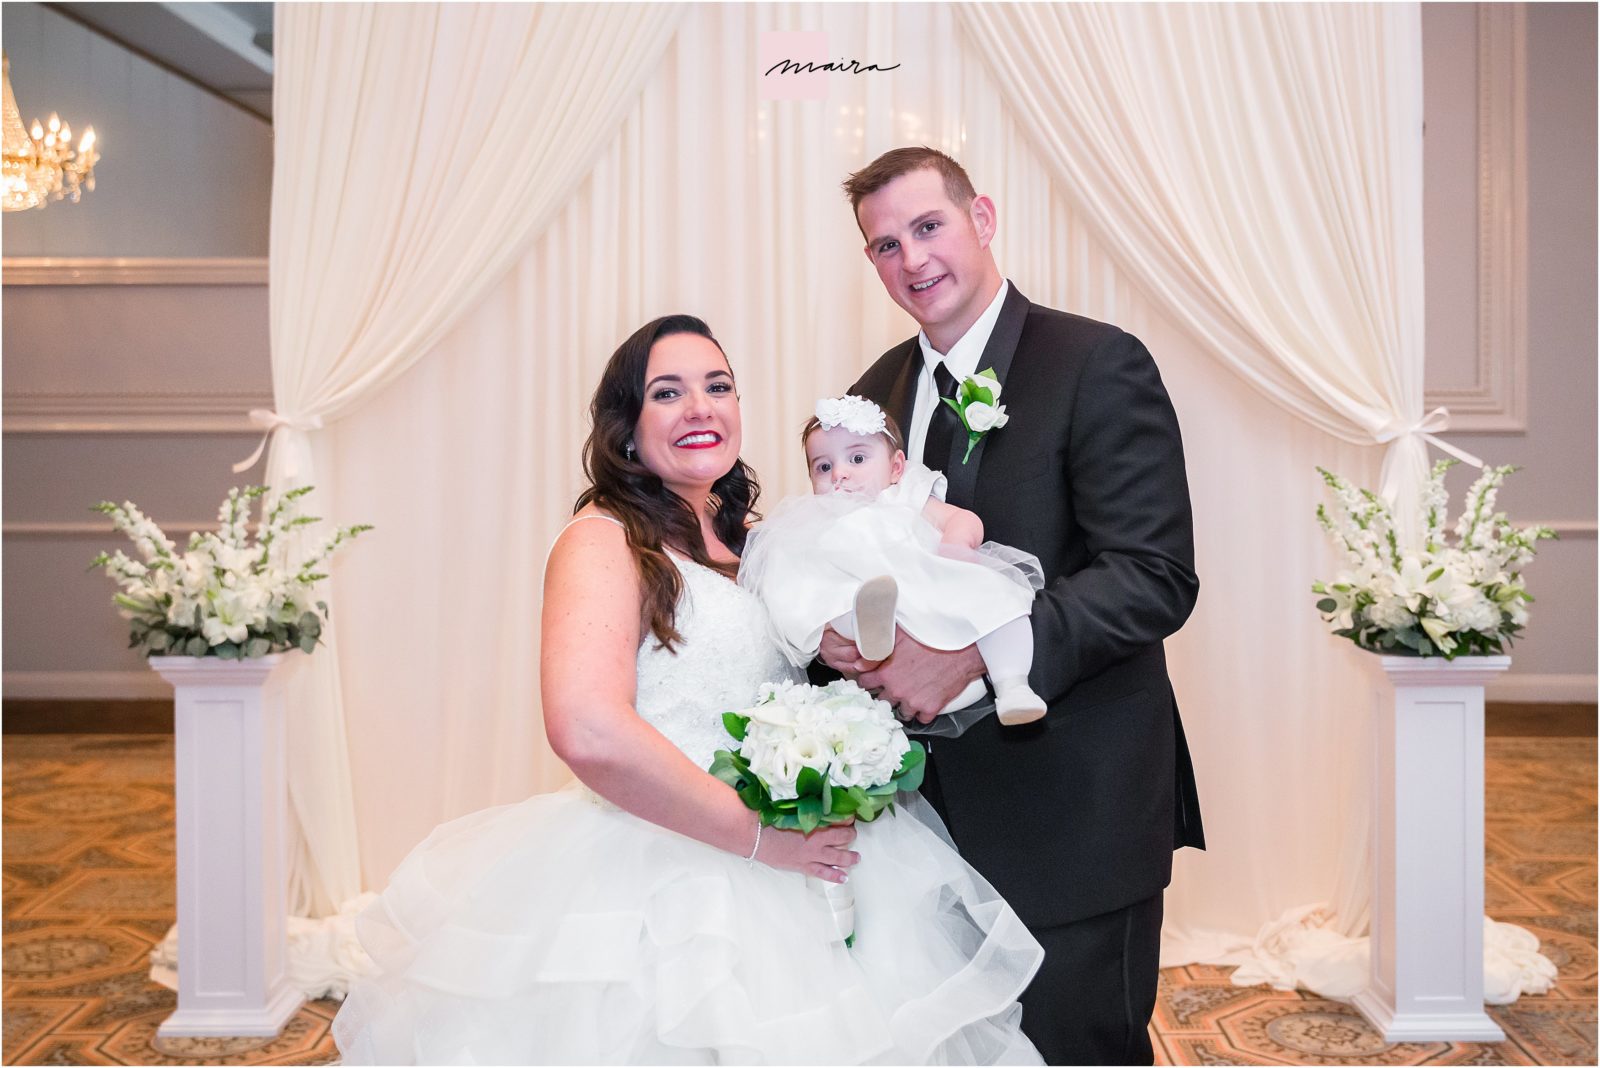 Oakbrook wedding in Drury Lane , Venue, Family and Friend Formal Portraits with Bride and Groom